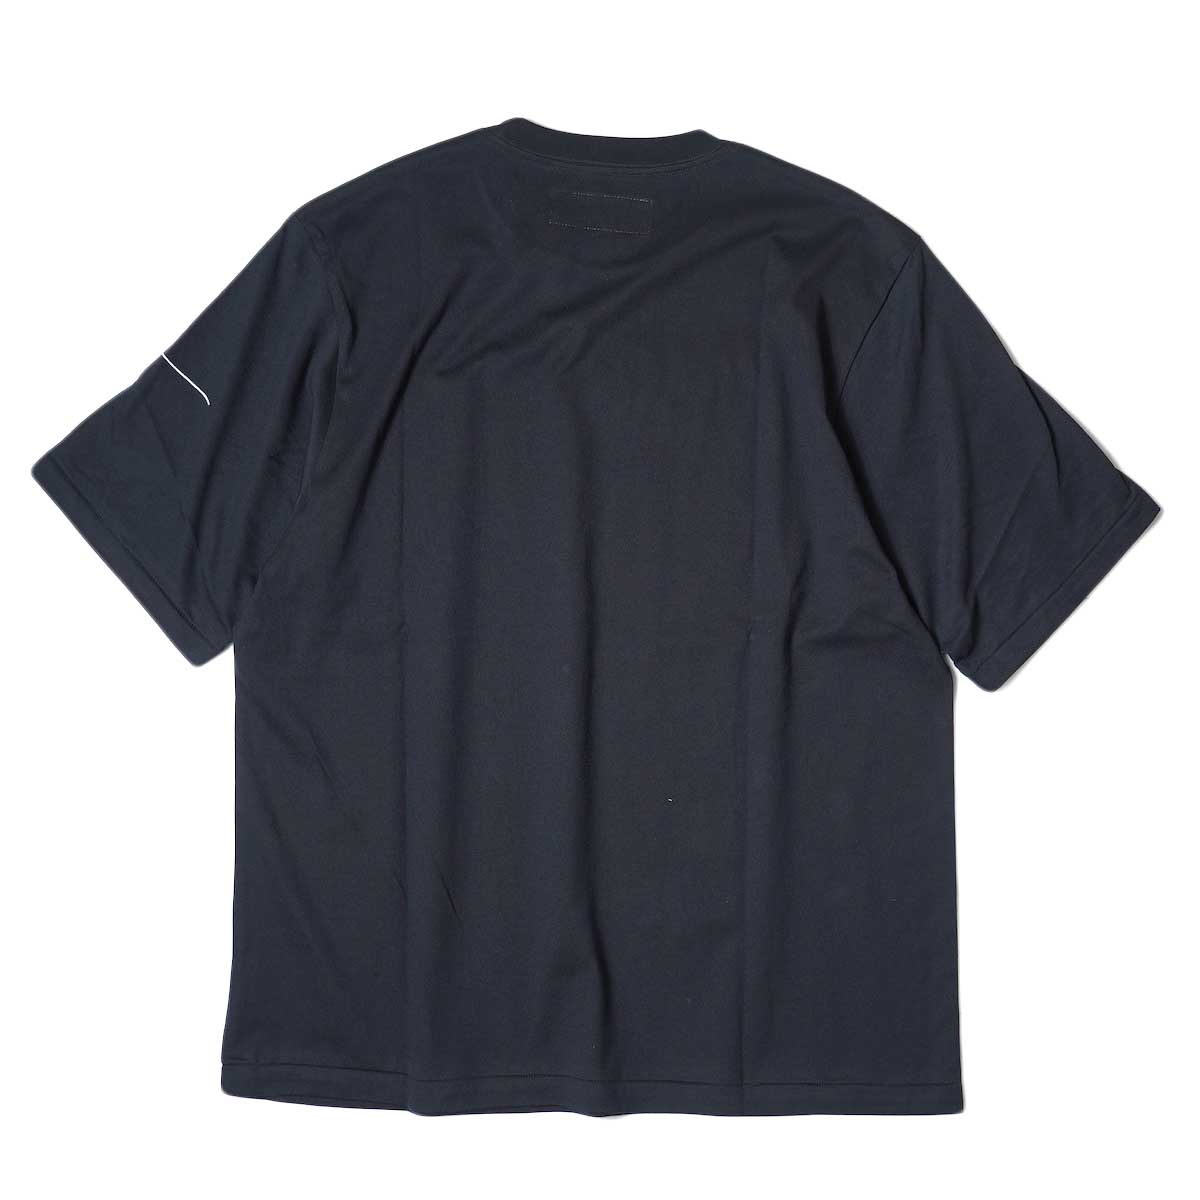 JANE SMITH / CADILLAC PLYMOUTH S/S T-Shirt (Black) 背面